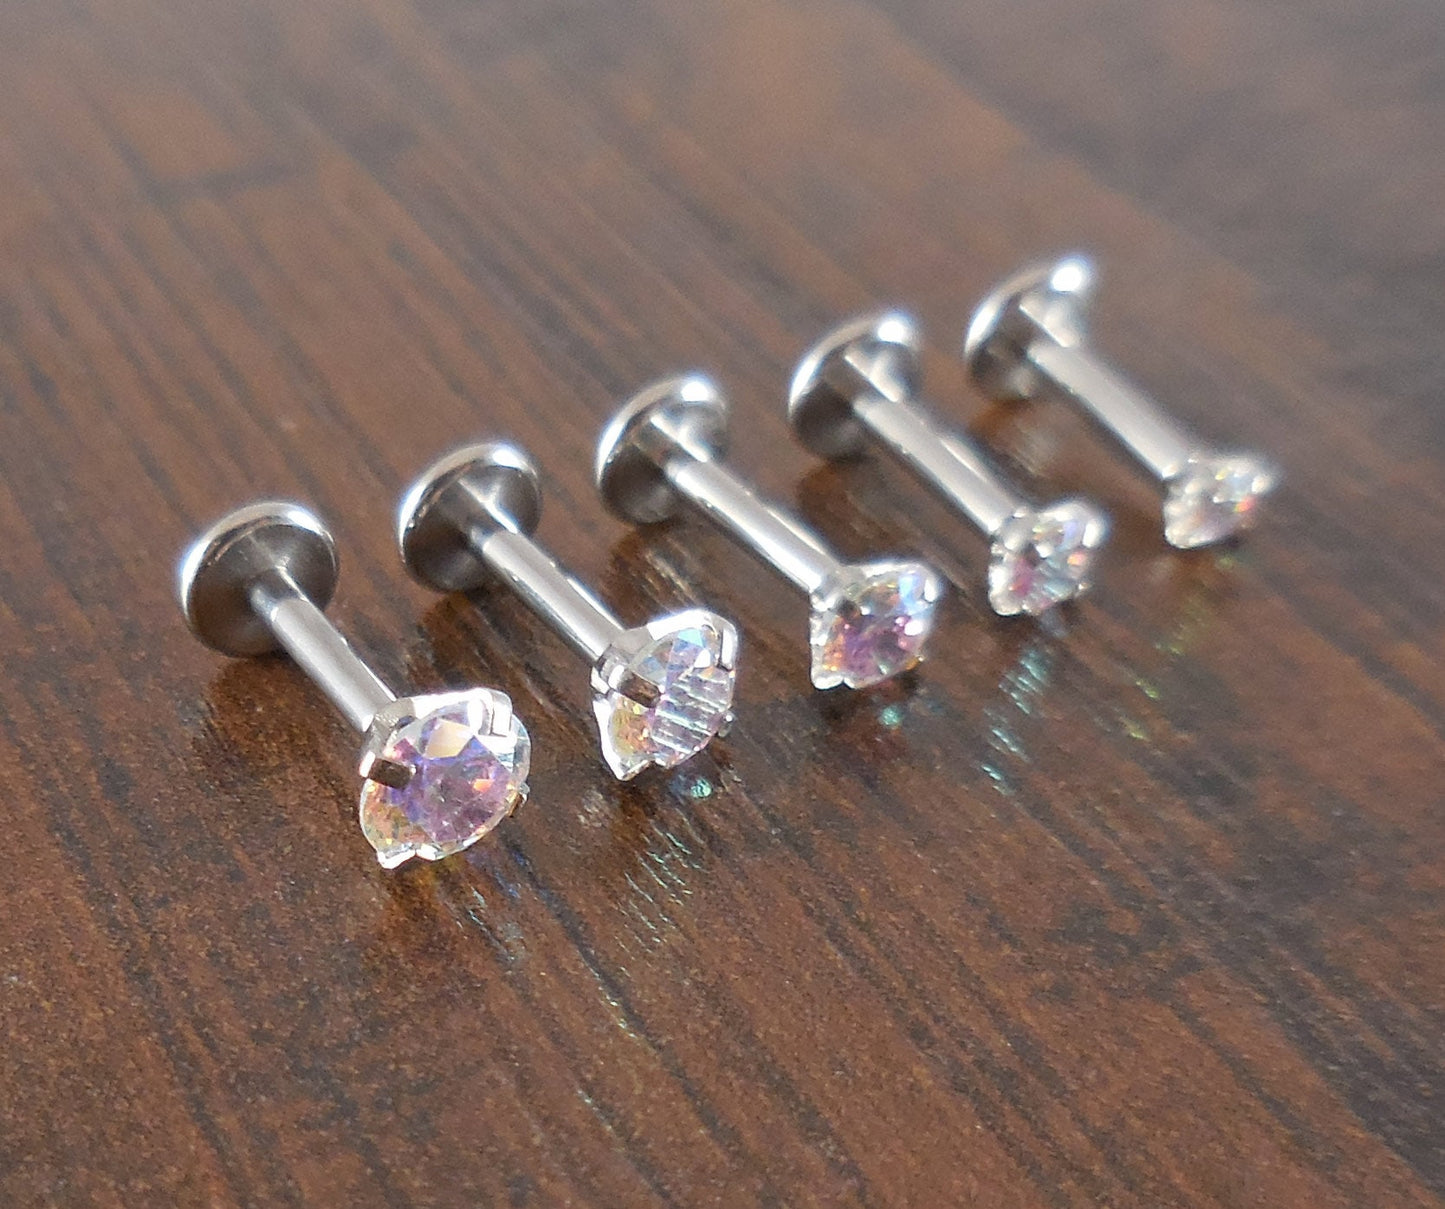 16g 2-4mm Tragus 5mm-10mm AB Crystal Rainbow Stone Threadless Push Pin Labret Triple Helix Nose Ring Cartilage Earrings Stainless Prong Set